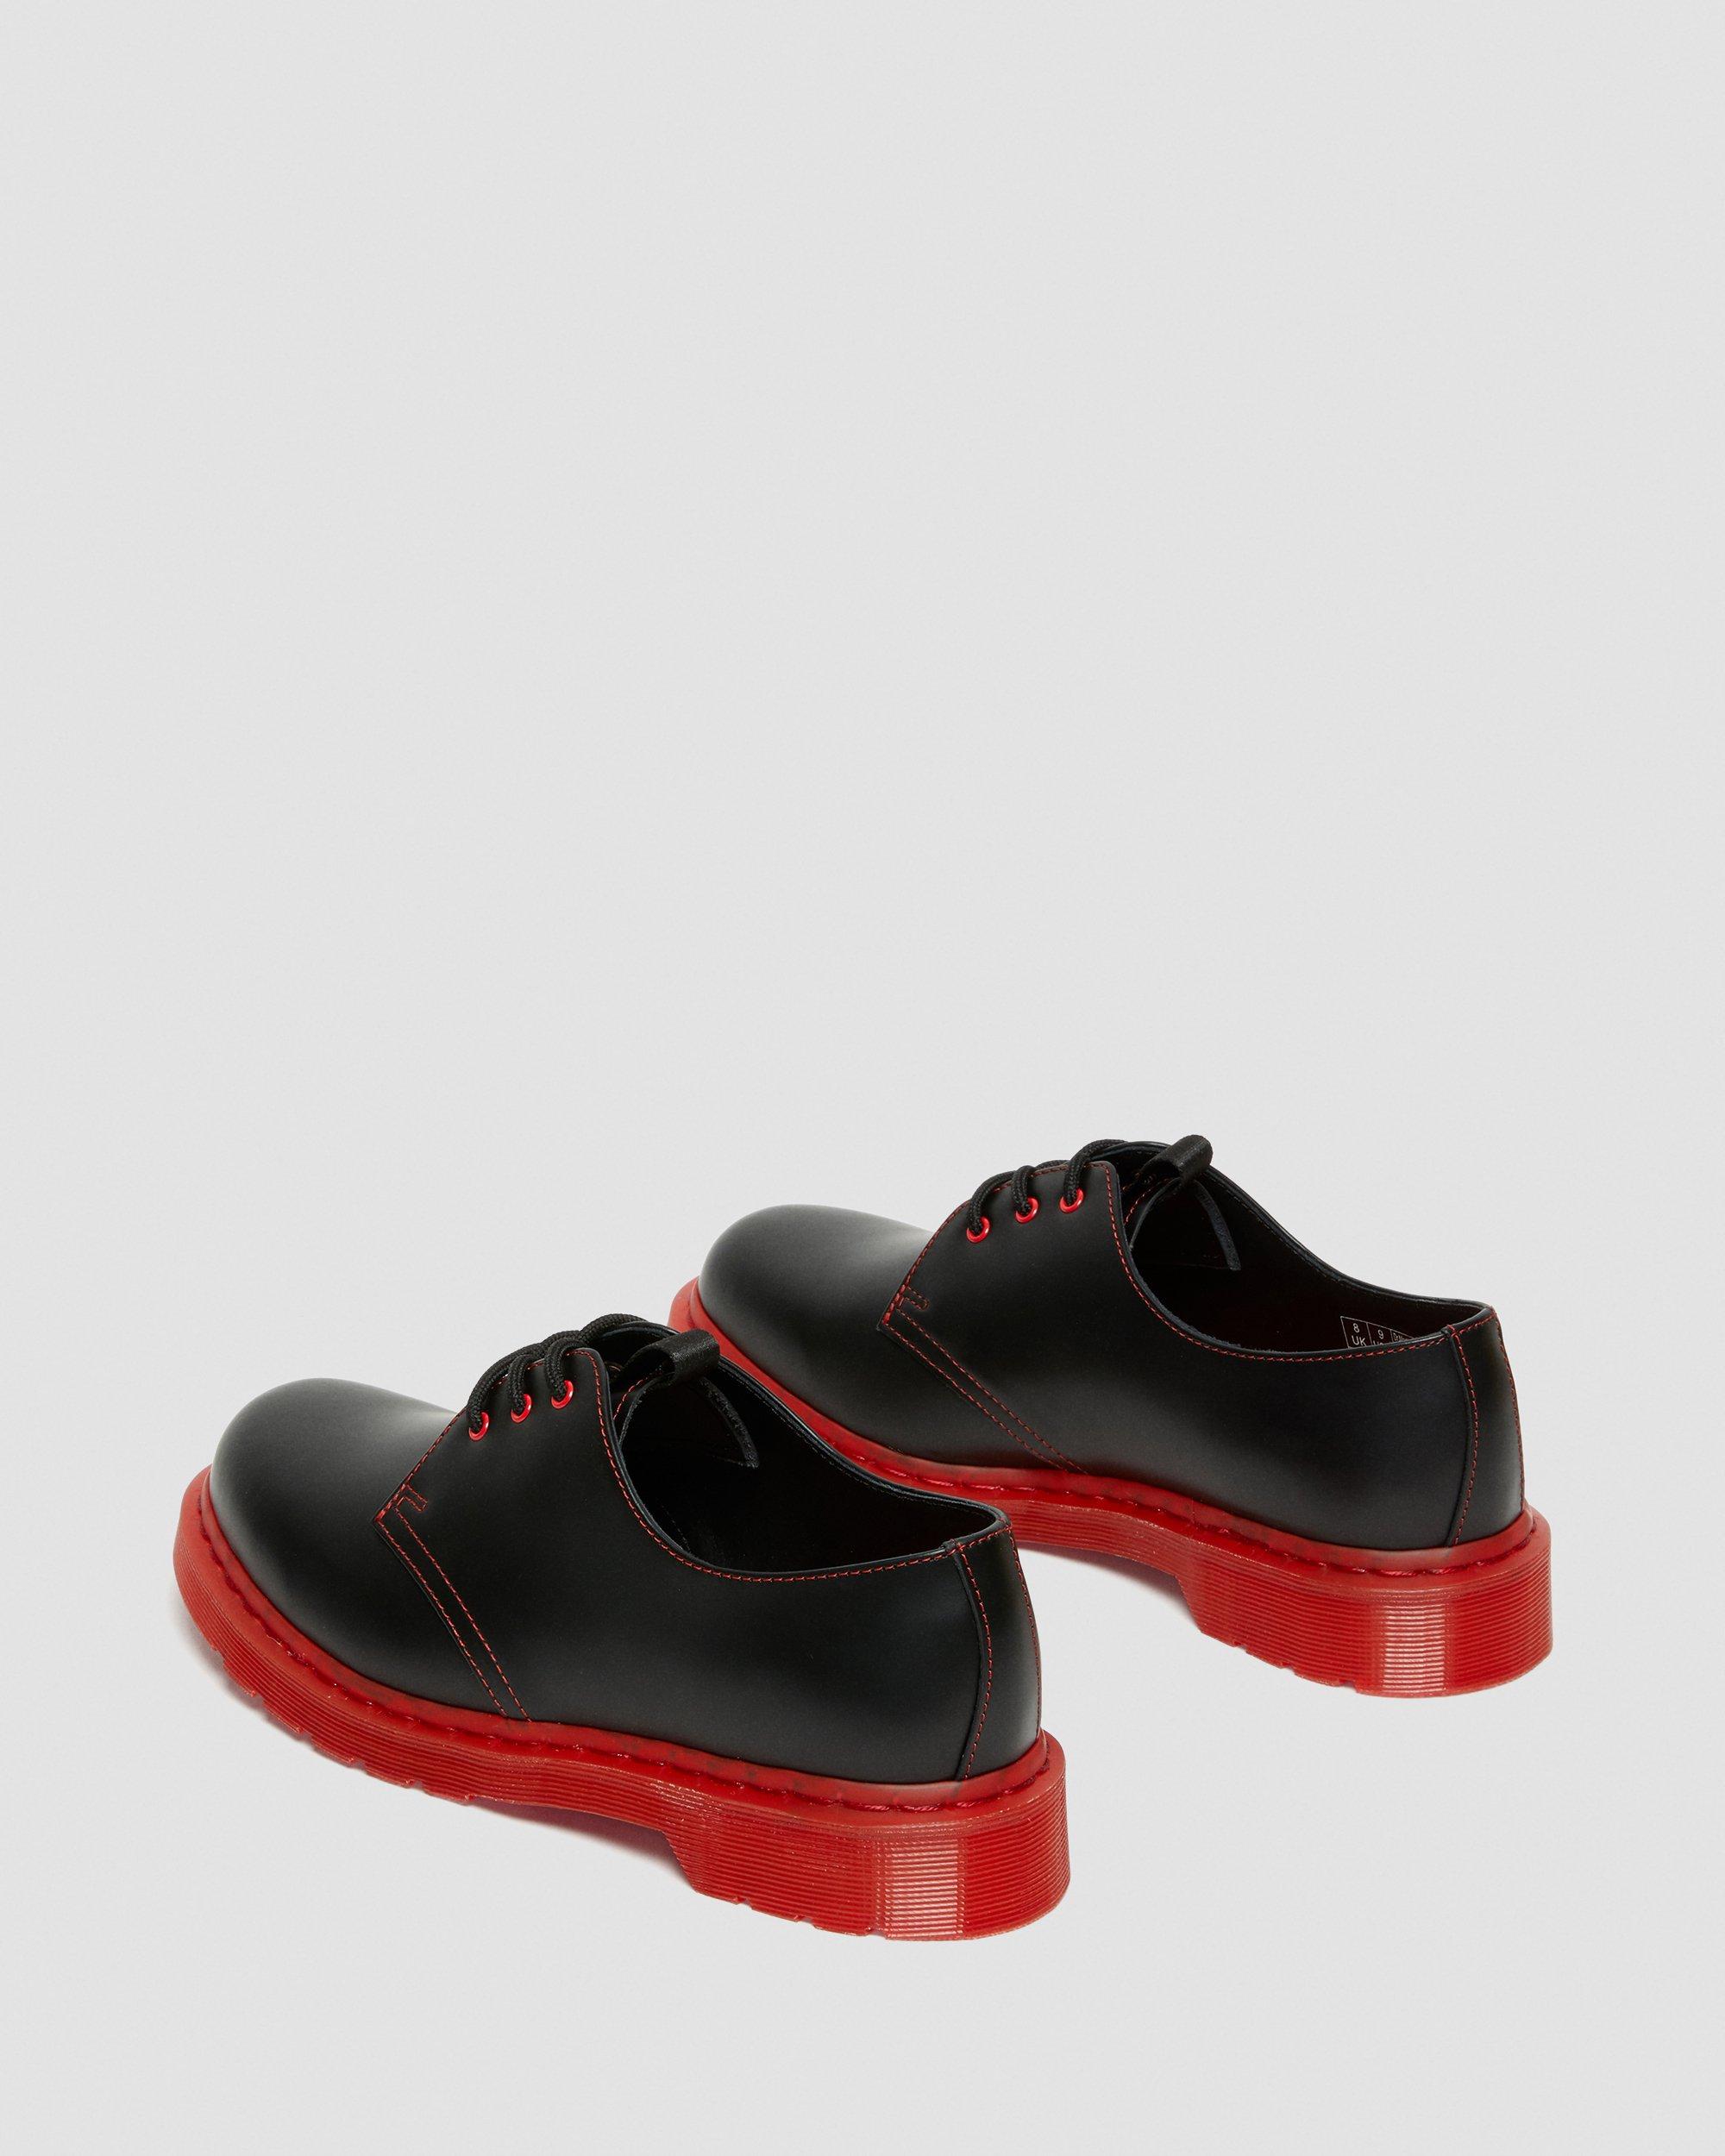 https://i1.adis.ws/i/drmartens/27153001.88.jpg?$large$1461 CLOT Leather Oxford Shoes Dr. Martens